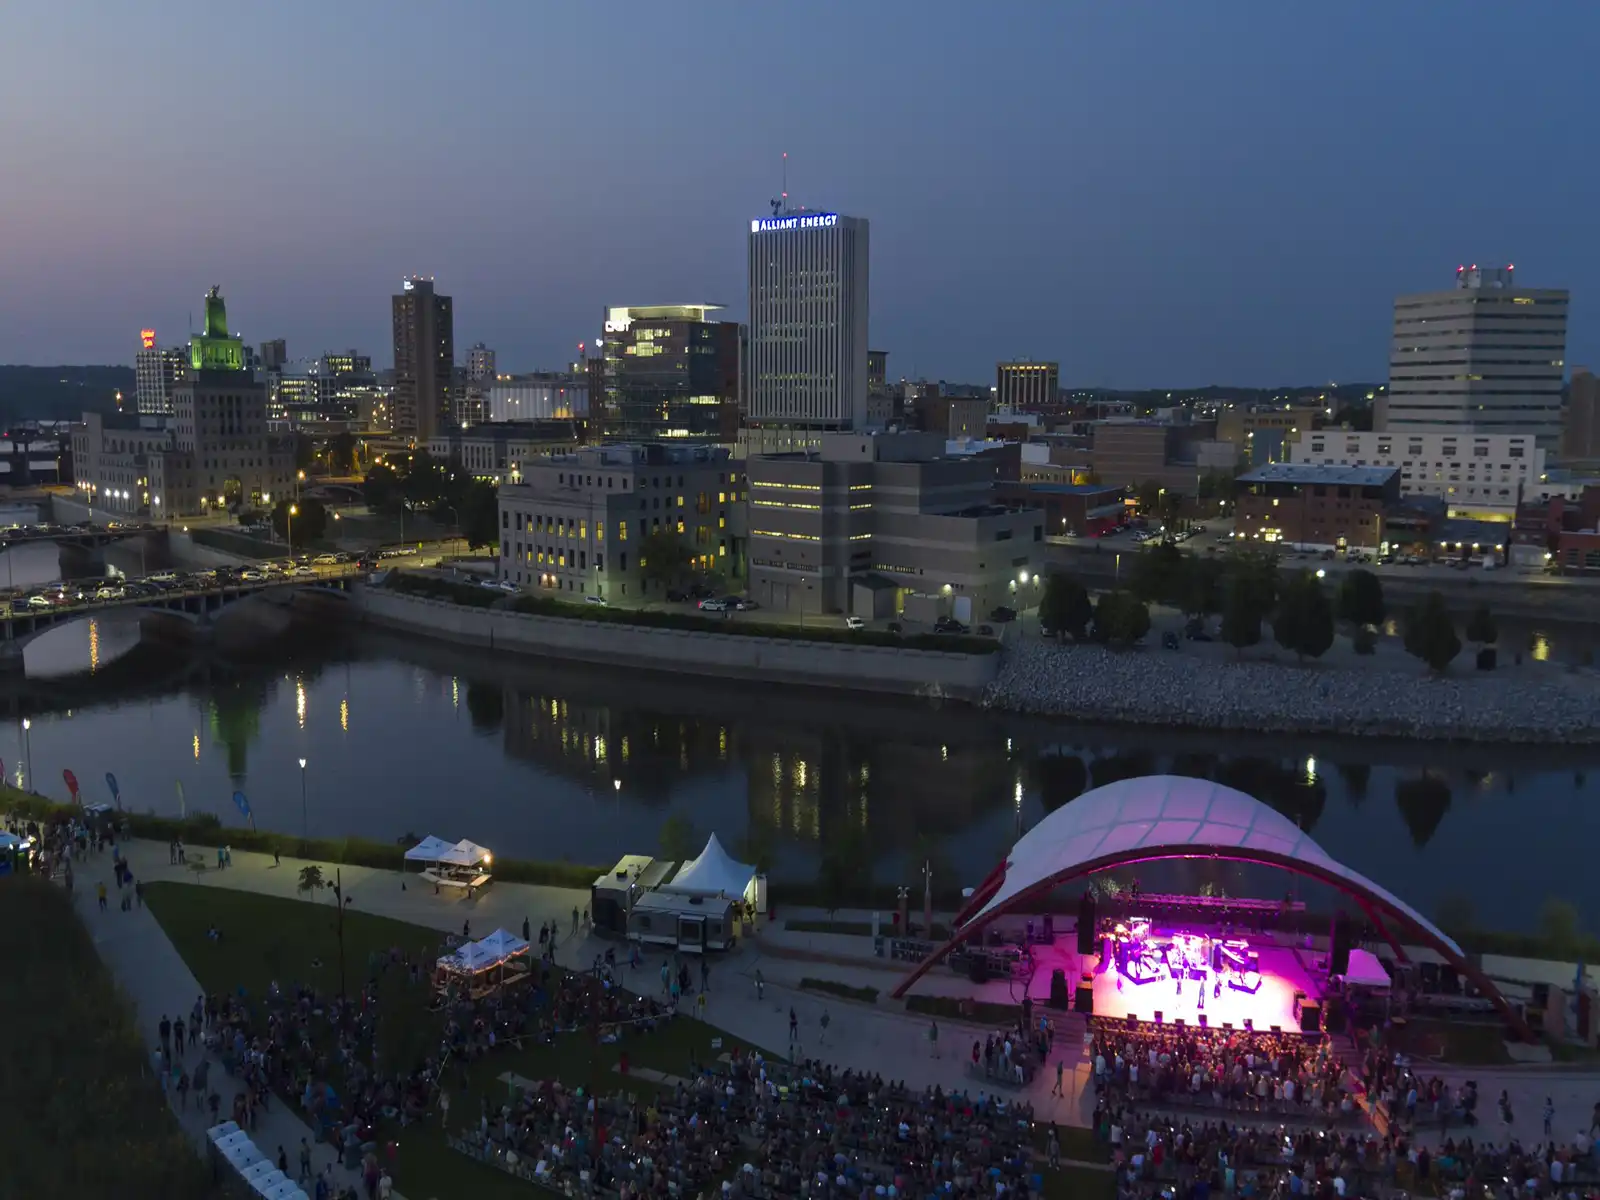 Aerial view of Cedar Rapids with buildings and a concert being performed